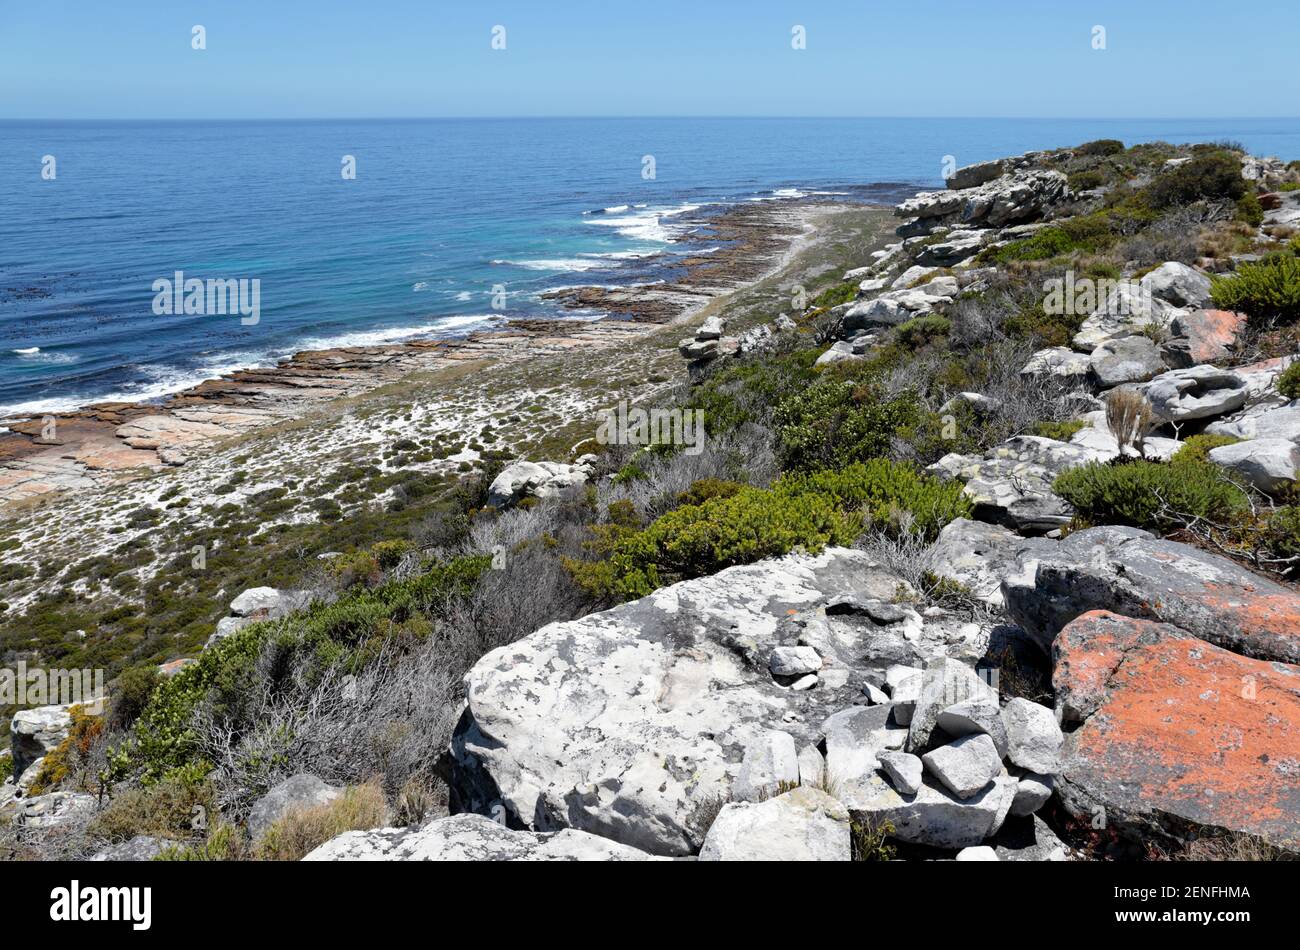 Gifkommetjie trail, Cape Point, South Africa Stock Photo